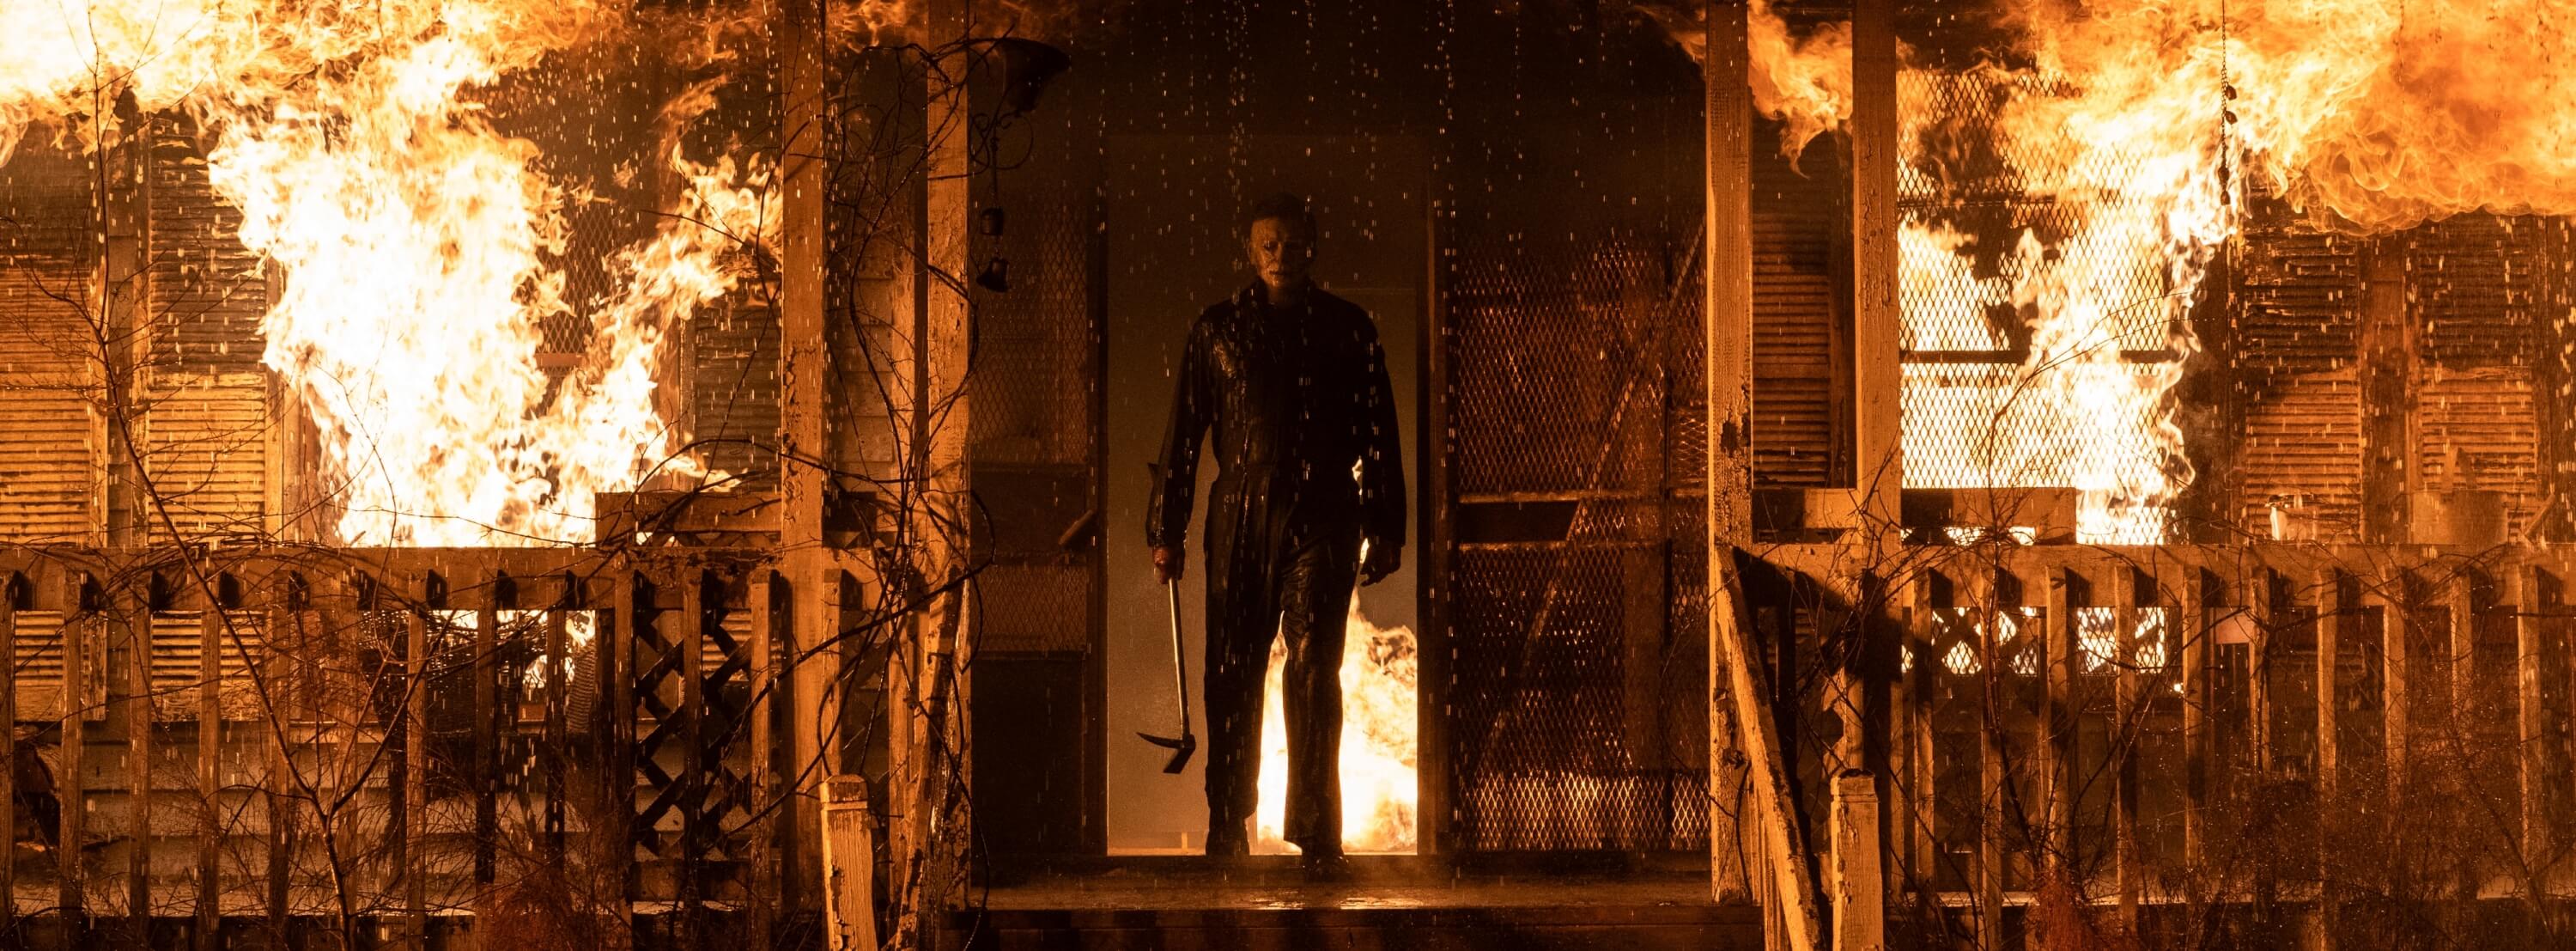 Michael Myers in Laurie Strode's burning house in Halloween Kills Halloween Ends trilogy